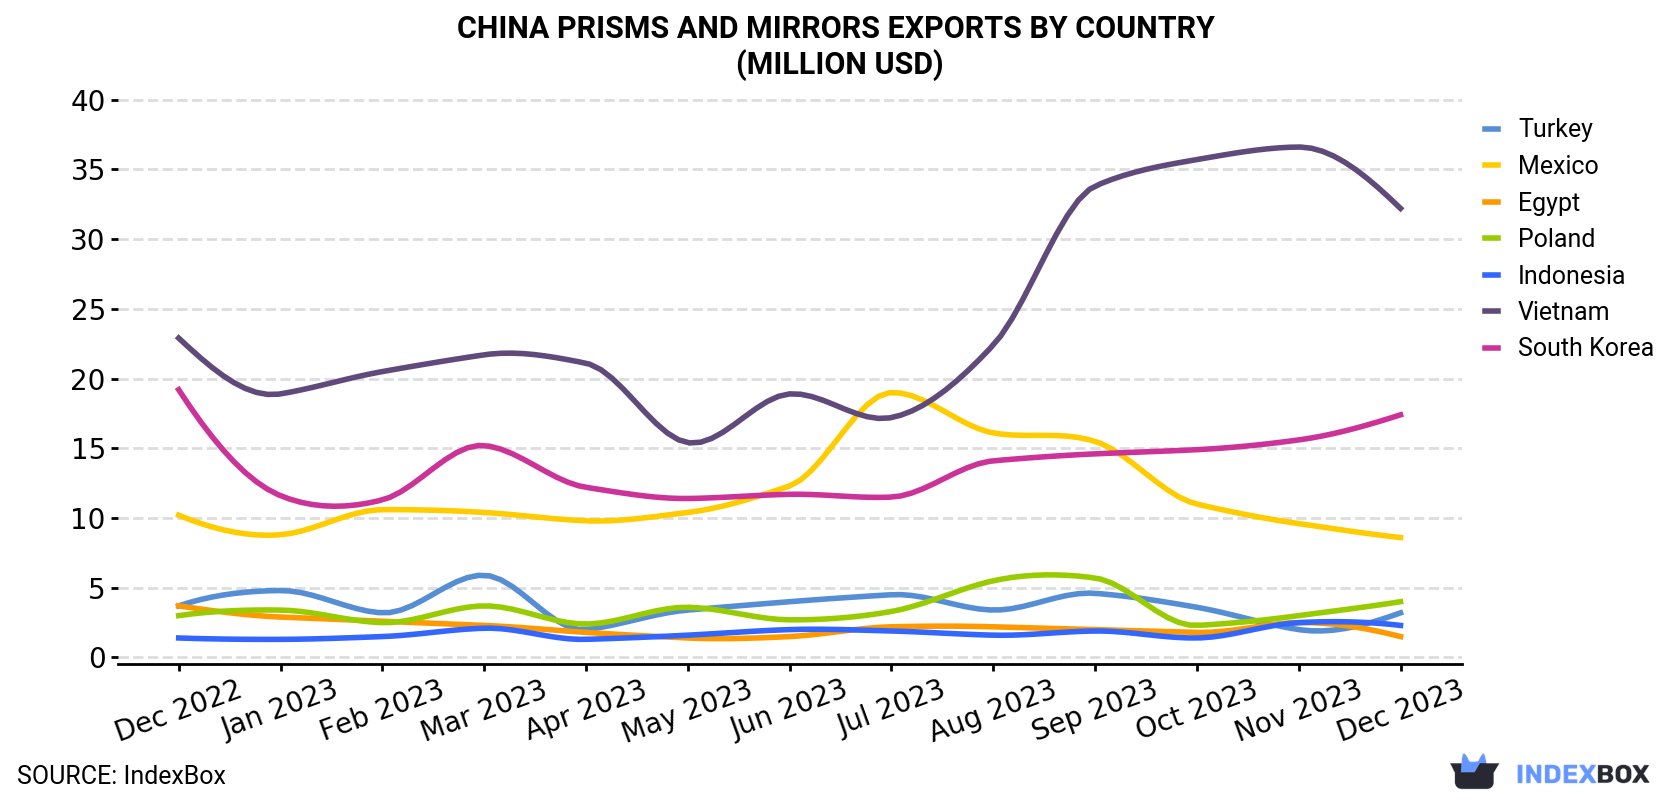 China Prisms And Mirrors Exports By Country (Million USD)